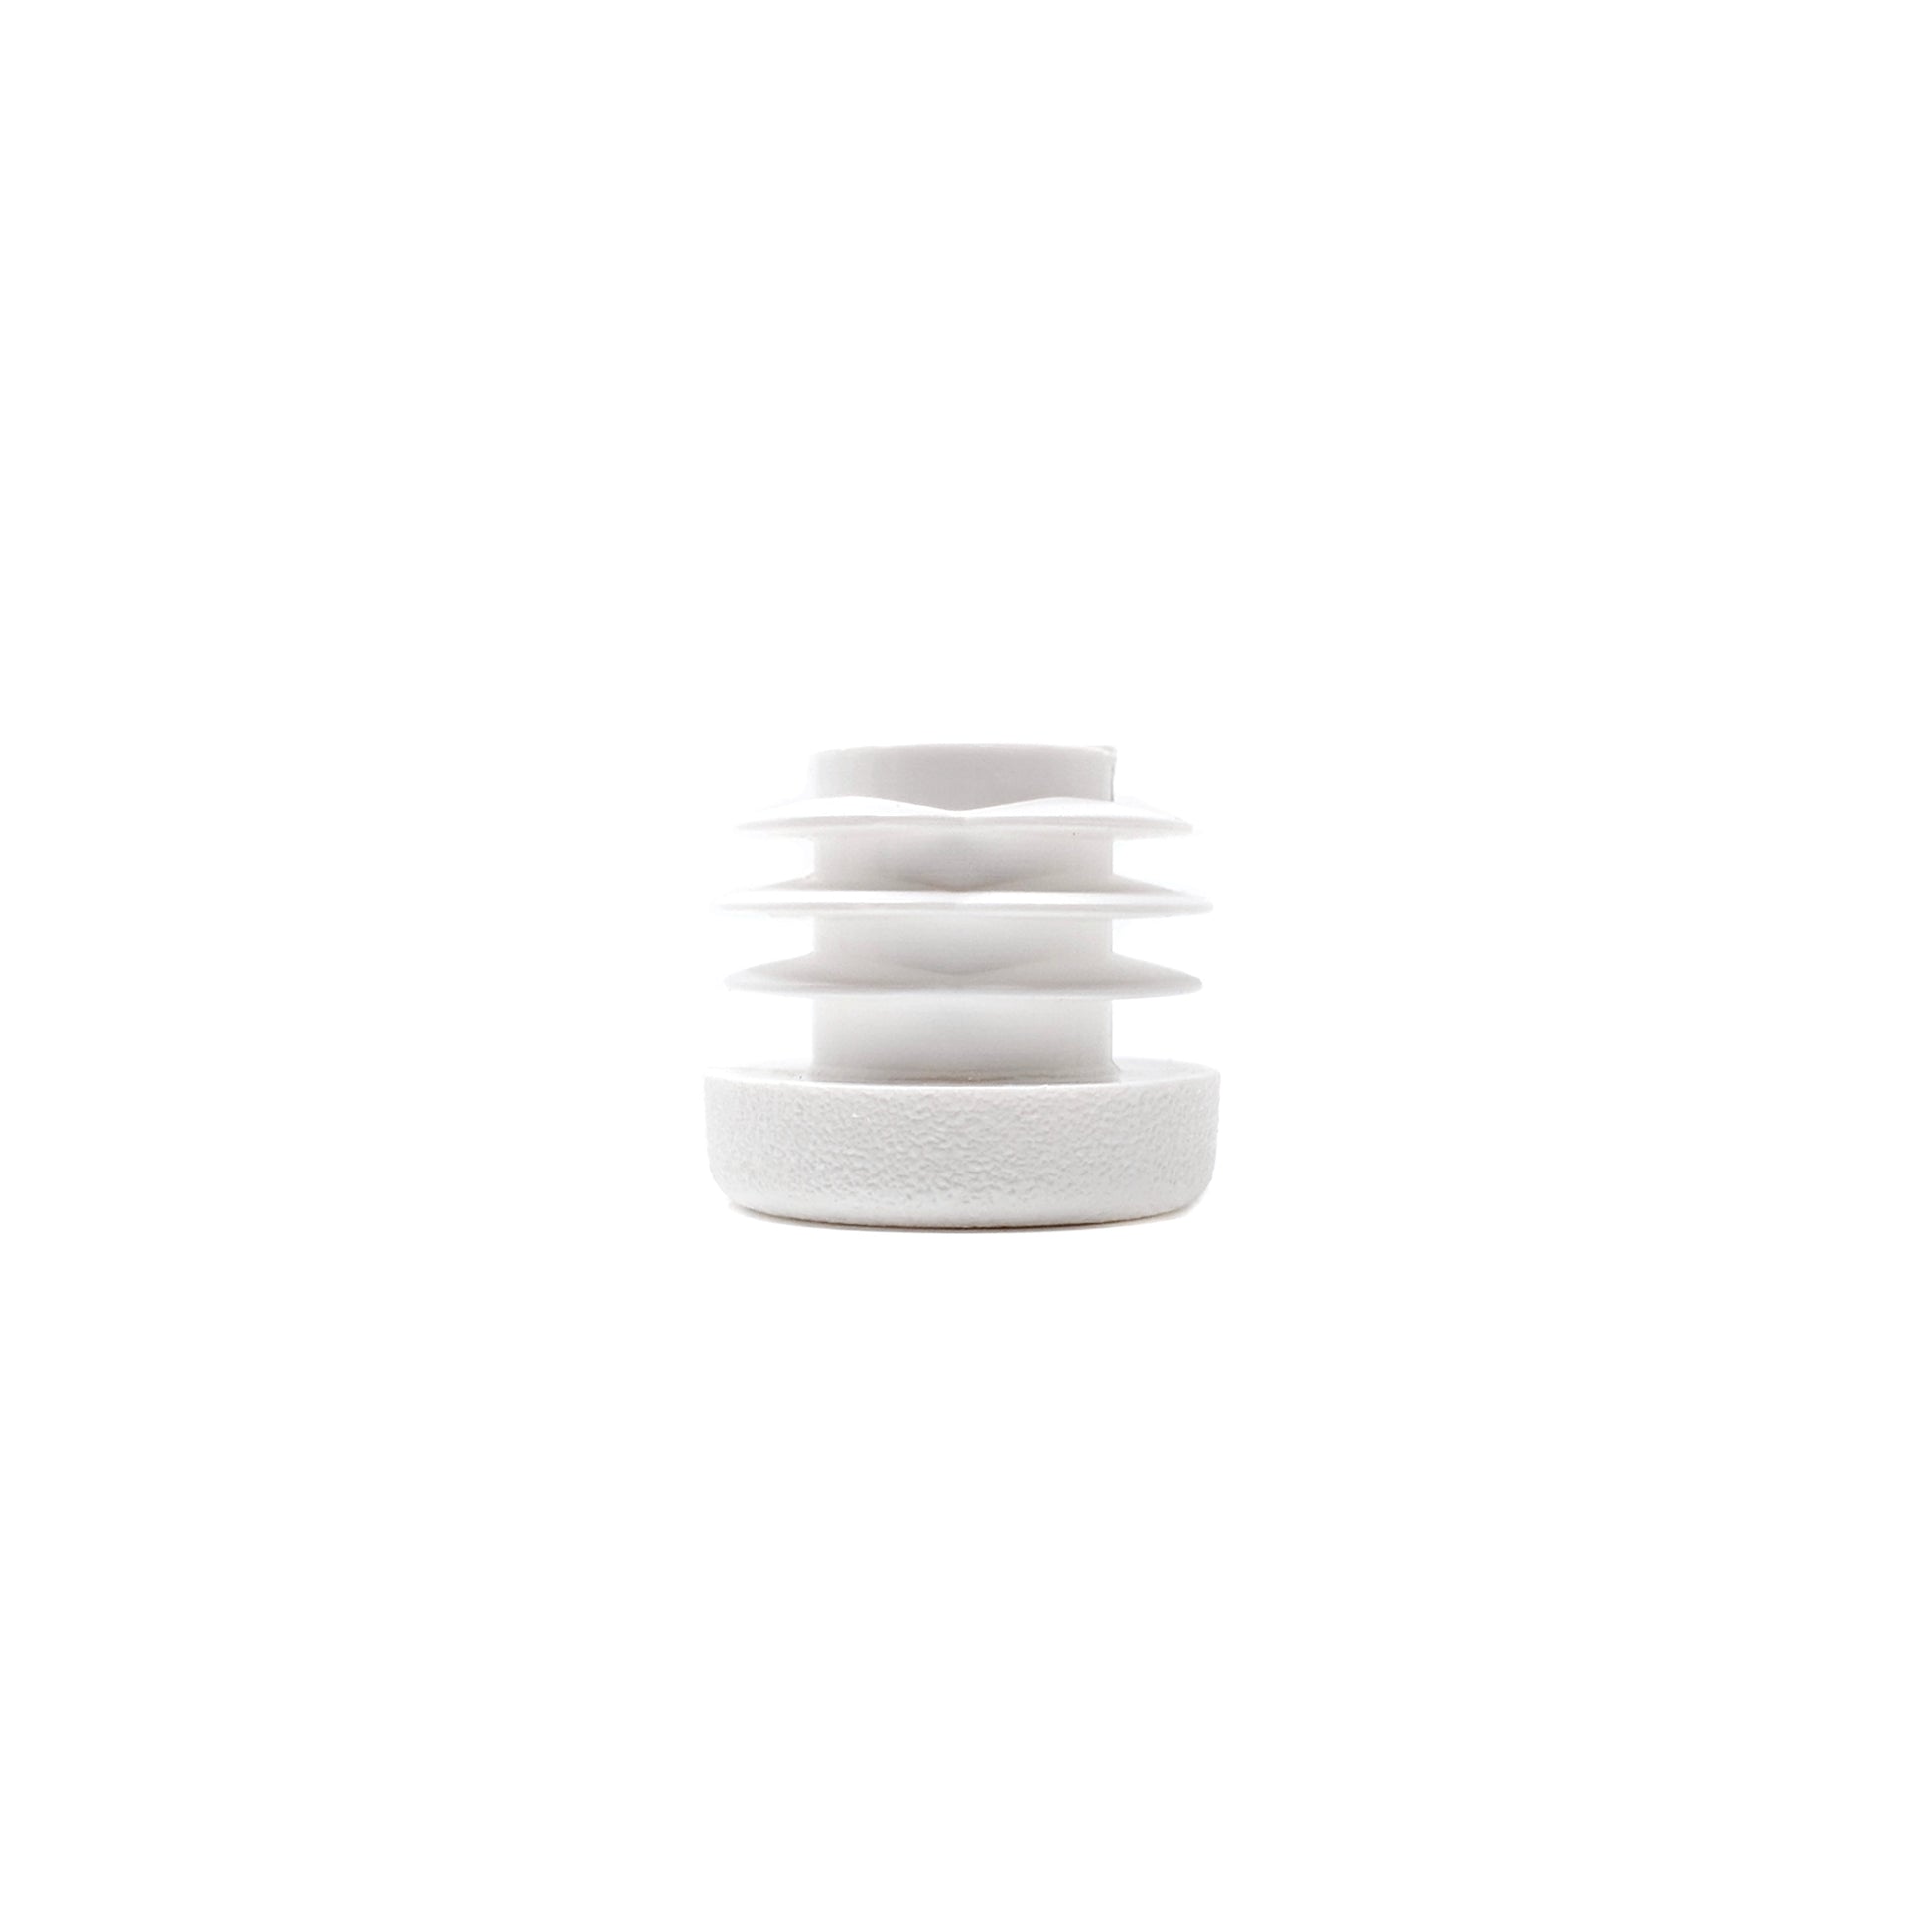 Round Tube Inserts 19mm White | Made in Germany | Keay Vital Parts - Keay Vital Parts